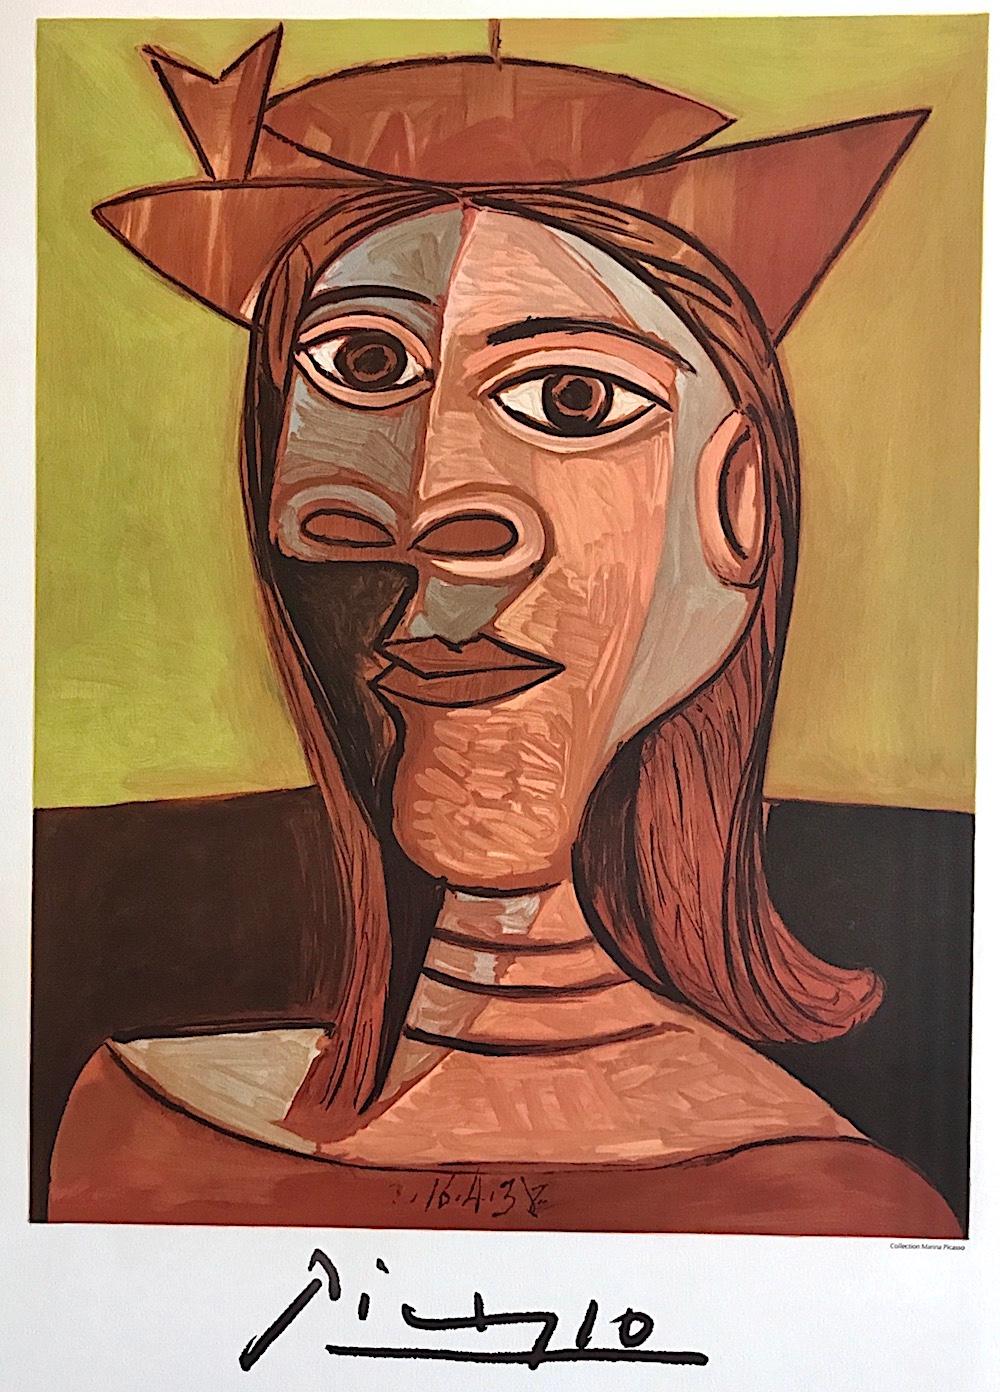 Tete de Femme, Lithograph, Abstract Portrait Head, Woman in Hat Terra Cotta Pink - Print by (after) Pablo Picasso